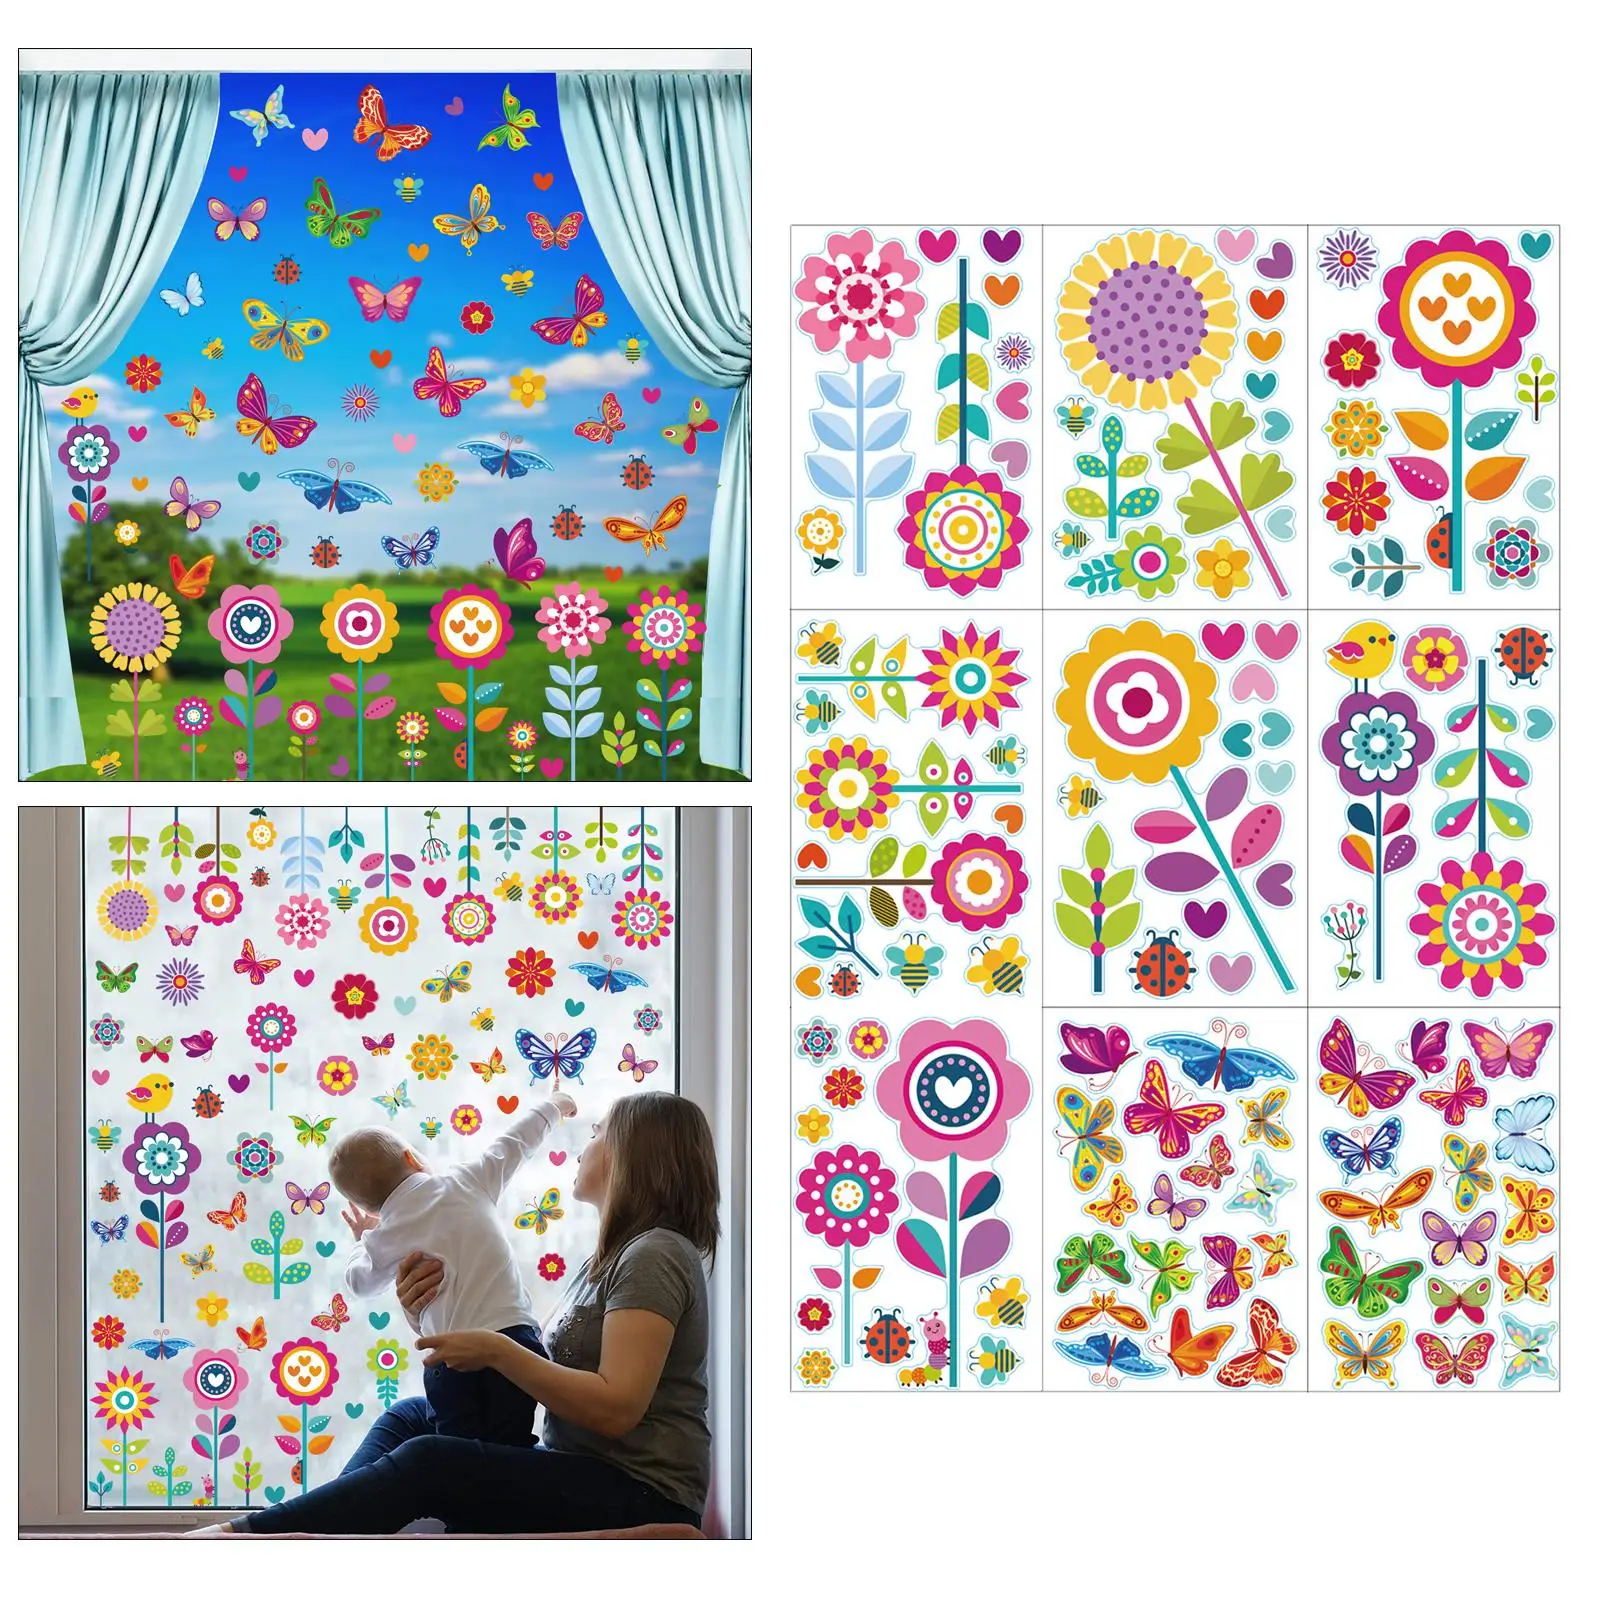 9Pcs Double-Sided Window Stickers DIY Crafts Butterfly Flower Static Non-Adhesive Glass Sticker for Glass Window Door Home Decor